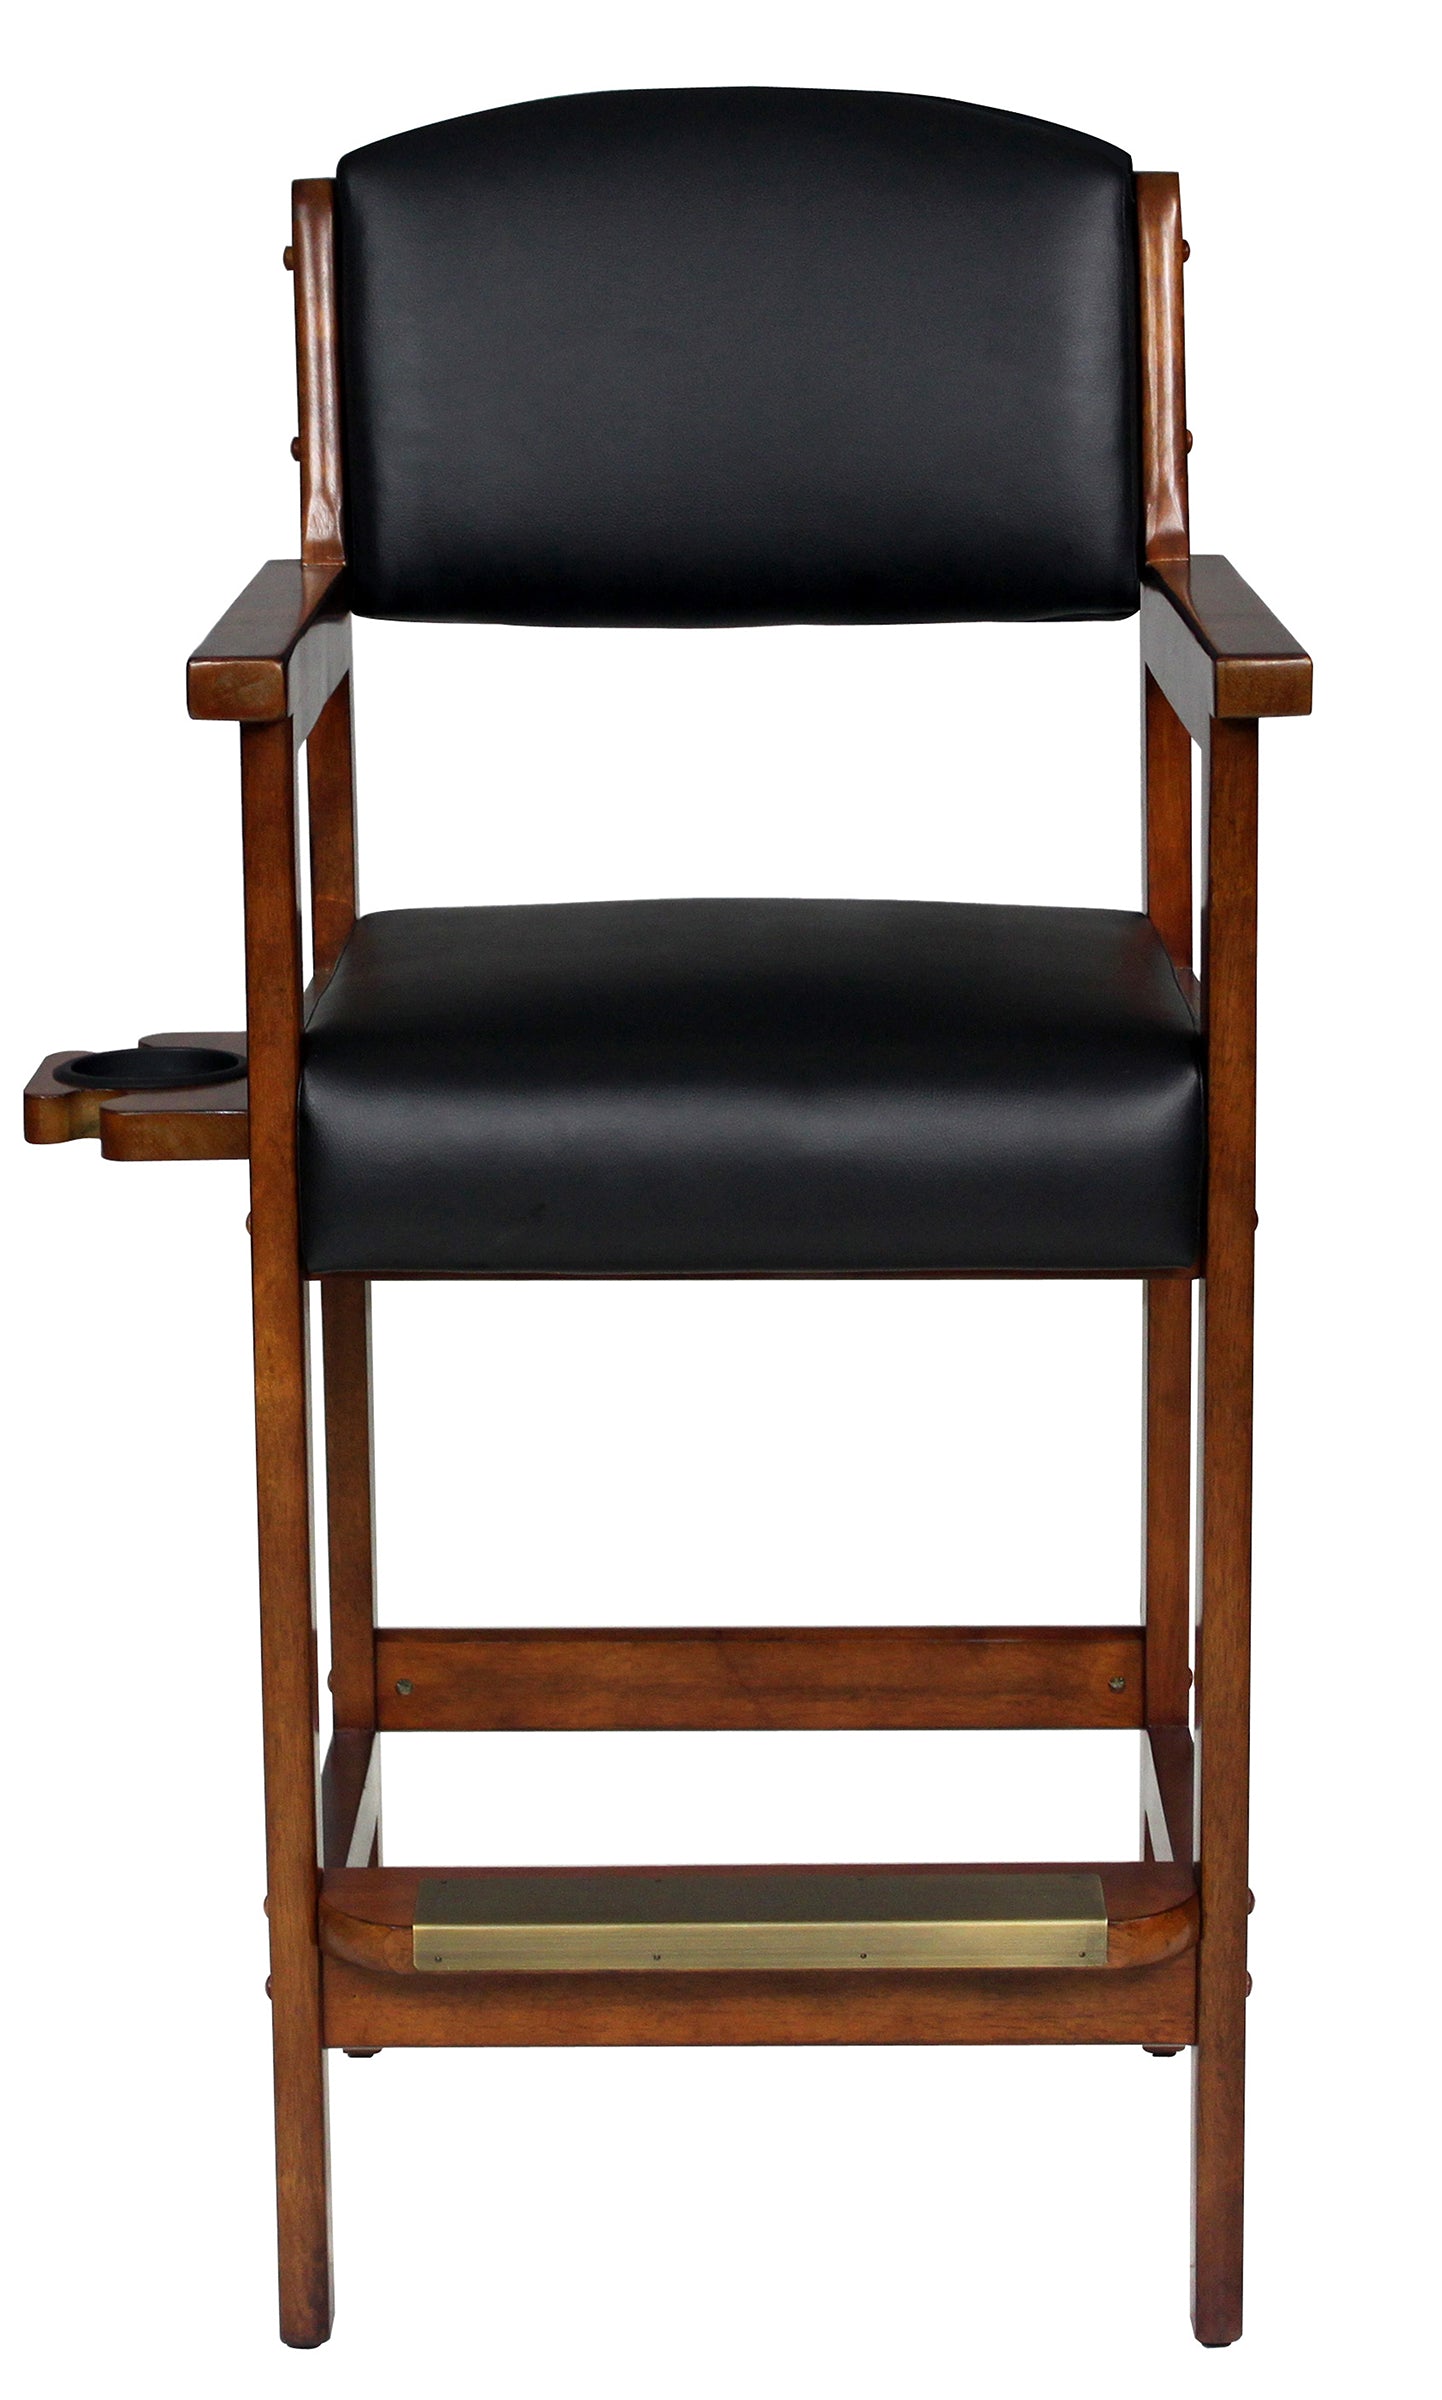 Legacy Billiards Heritage Spectator Chair Front View